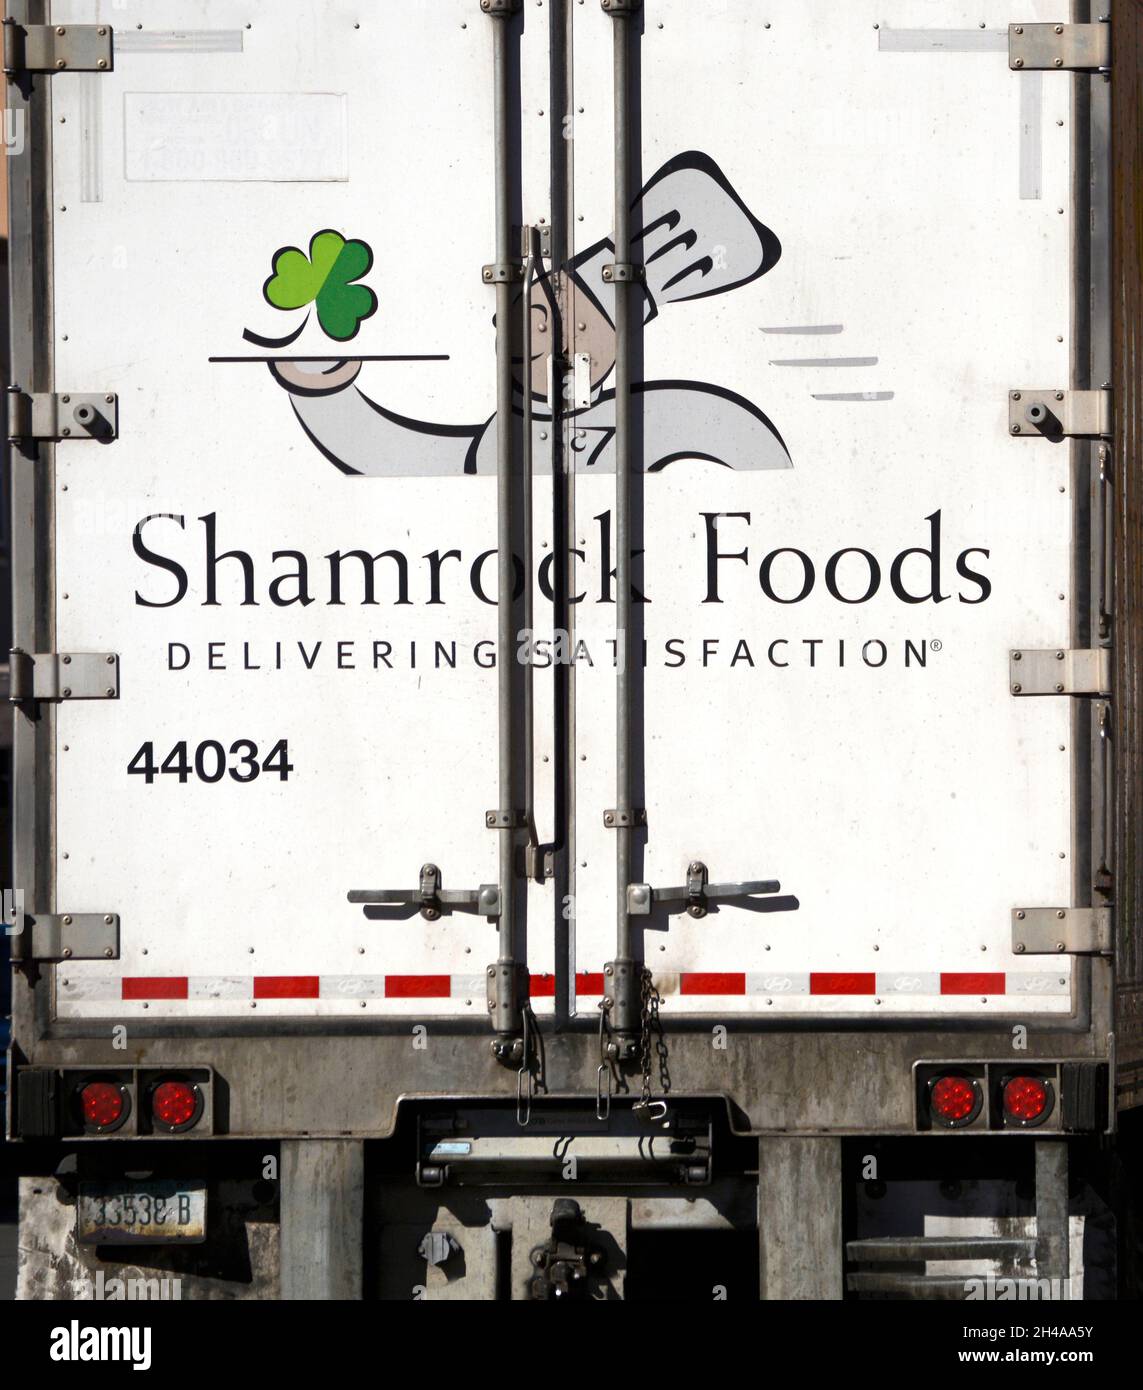 A Shamrock Foods Company truck delivers produce and other food items to restaurants in Santa Fe, New Mexico. Stock Photo